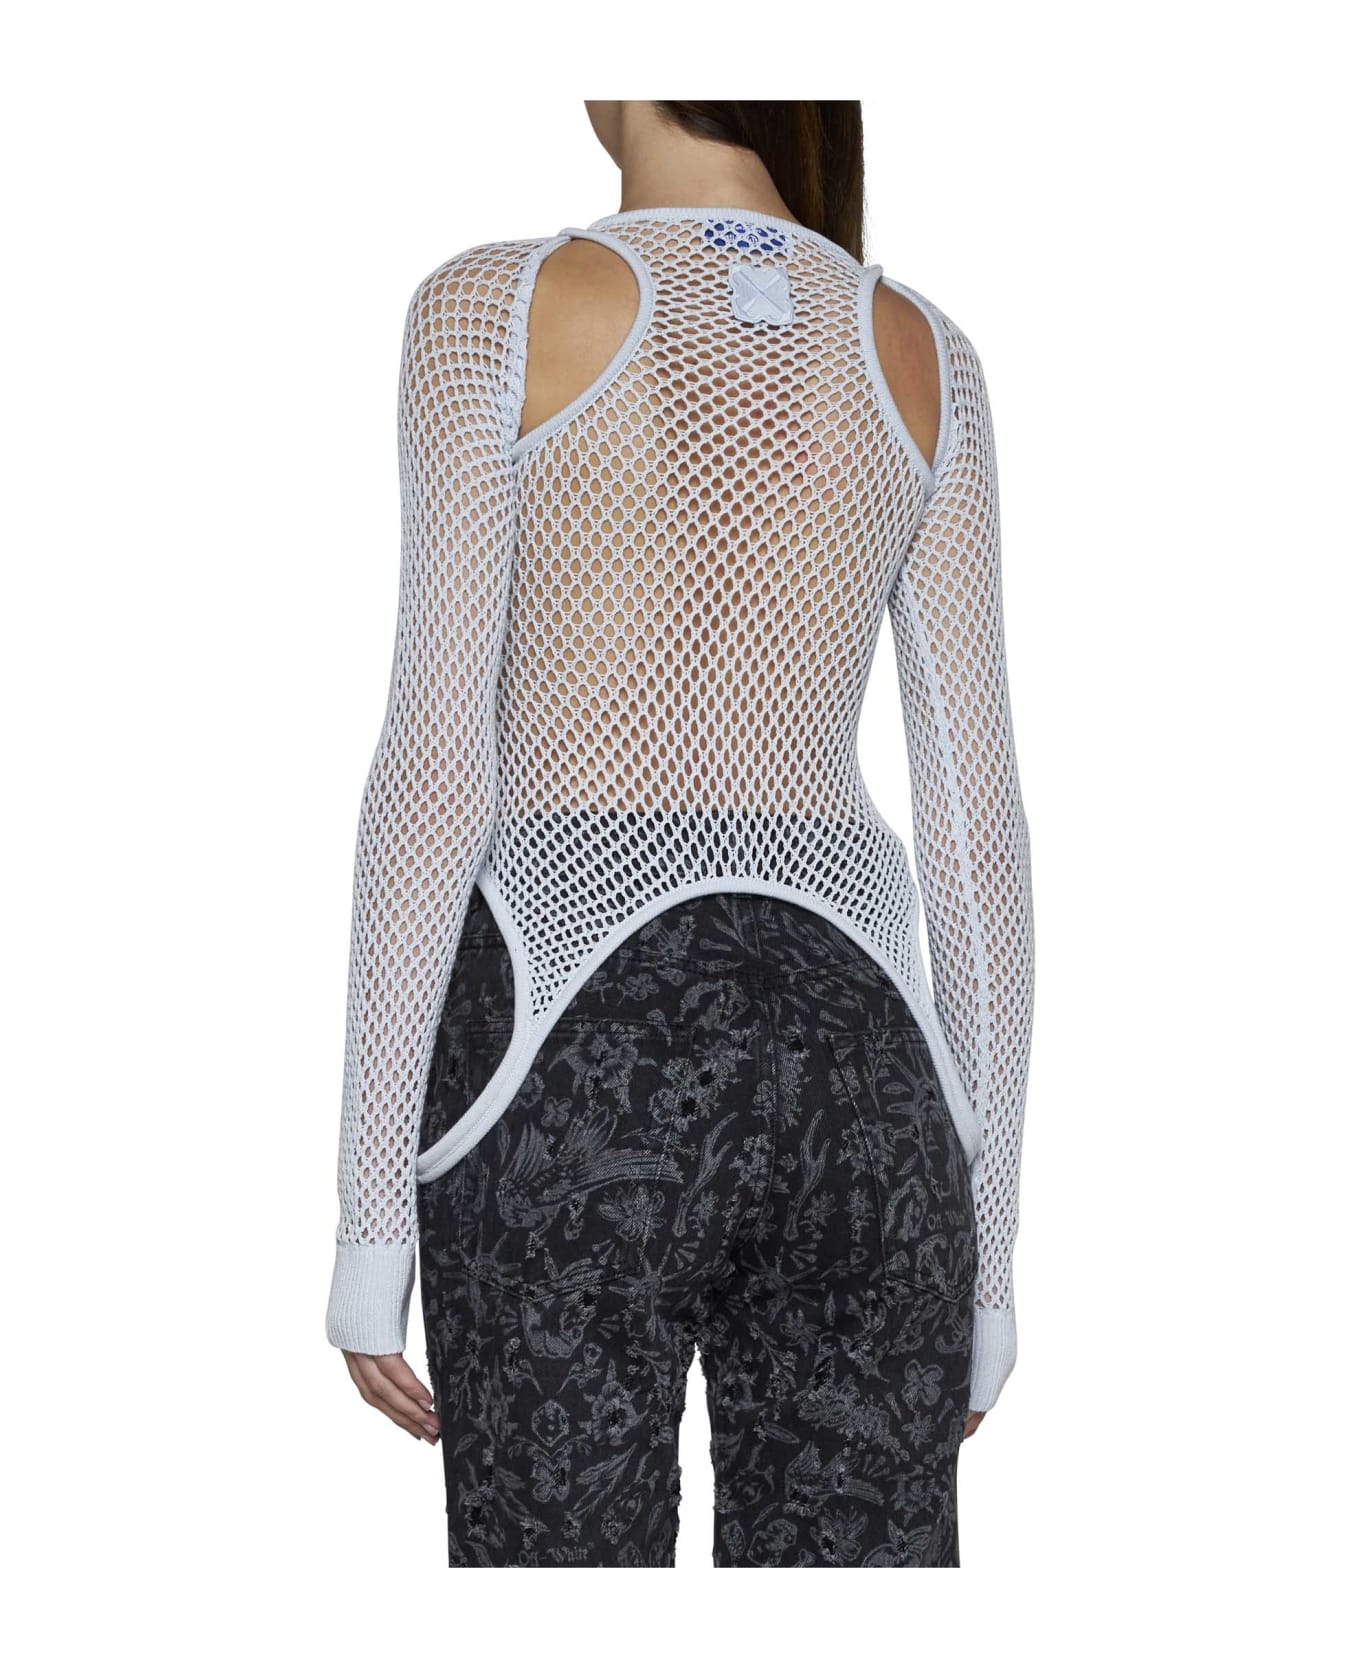 Off-White Ribbed And Mesh Knit Top - Artic ice white ボディスーツ